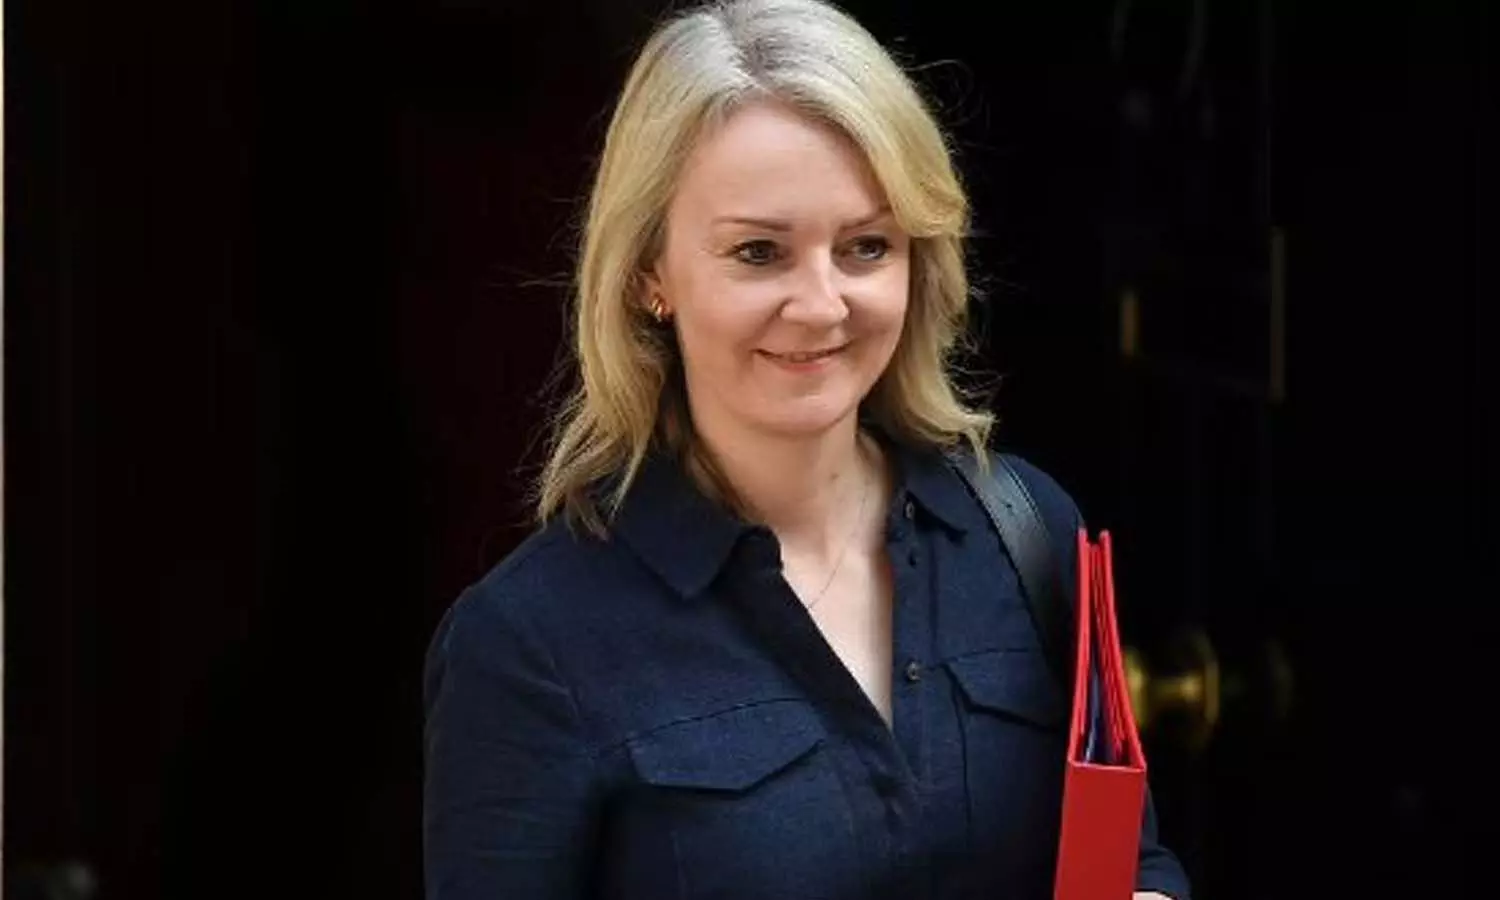 Liz Truss will be the new Prime Minister of Britain, will meet the Queen tomorrow